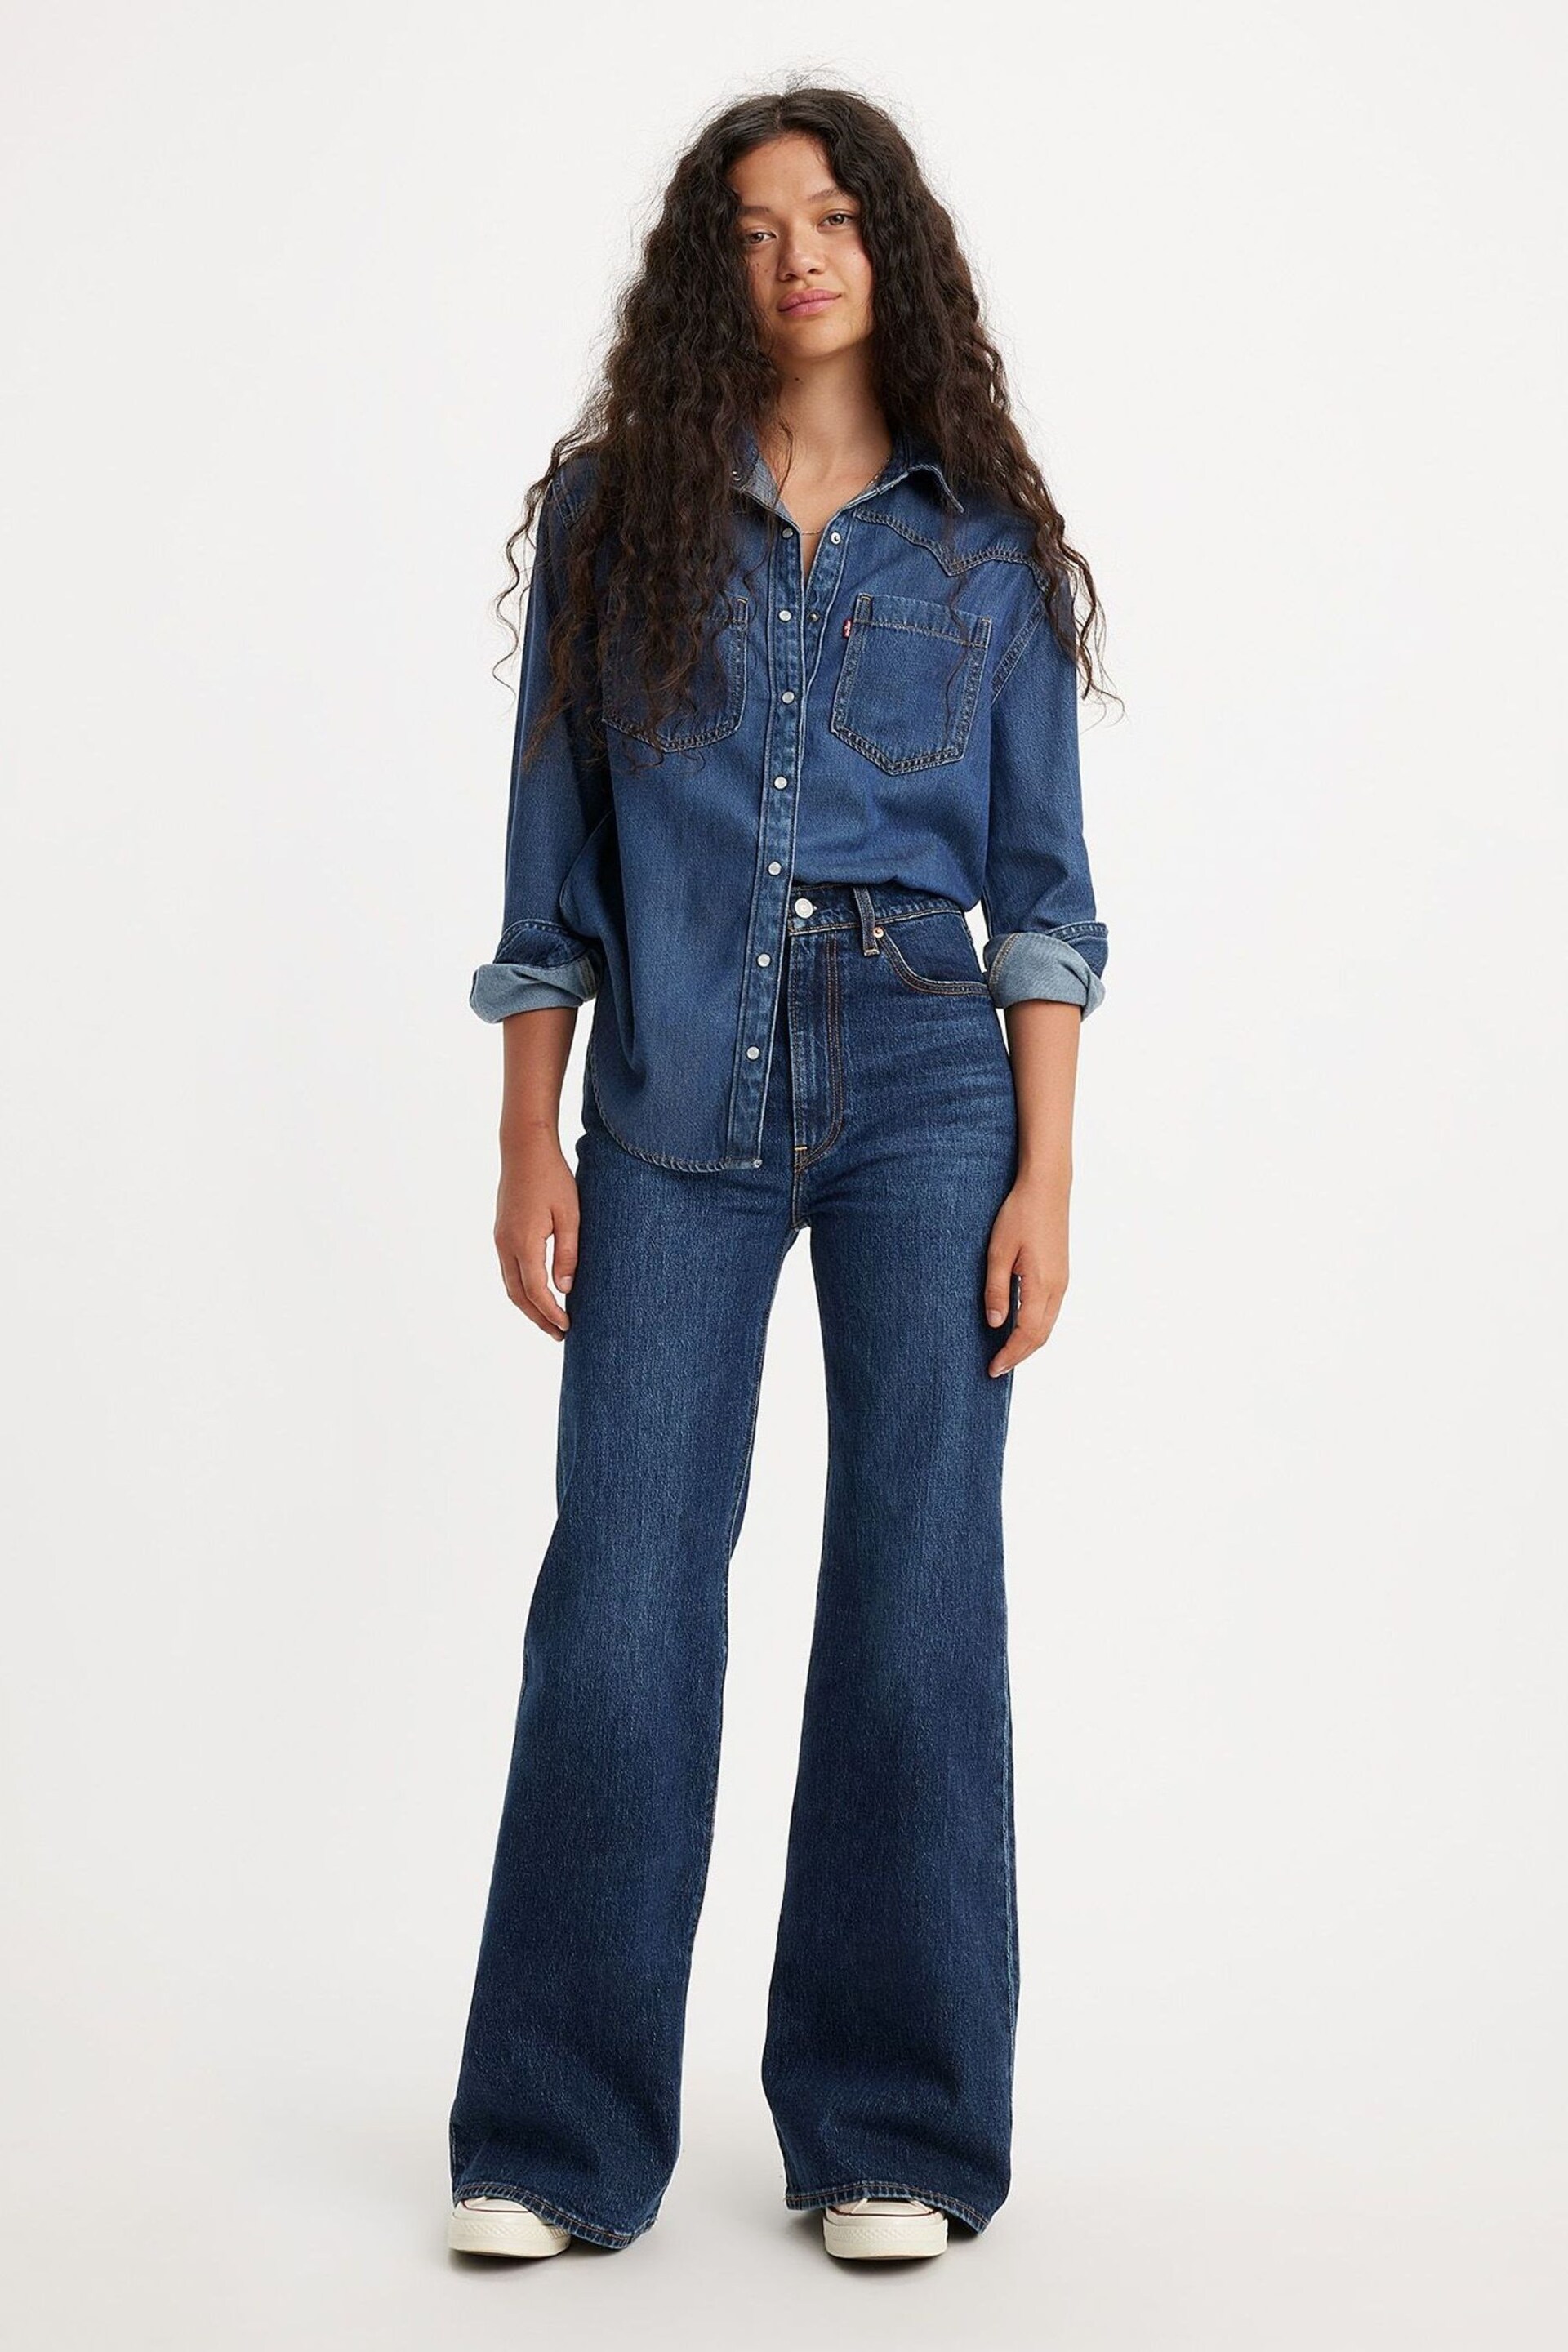 Levi's® Sonoma Train Ribcage Bell Jeans - Image 6 of 12